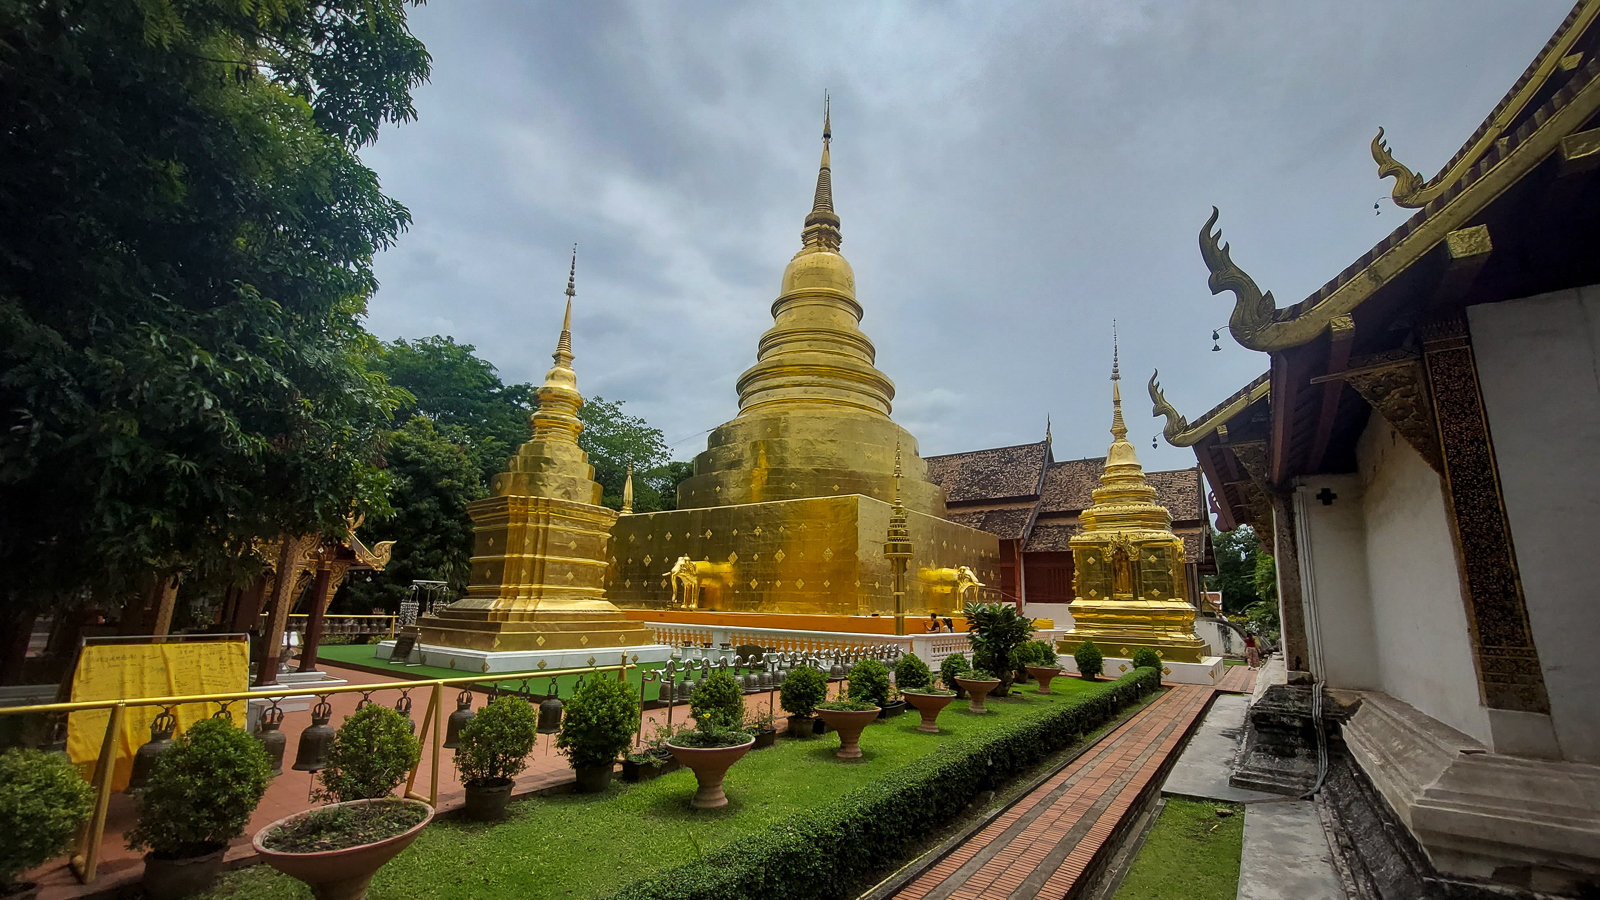 <span  class="uc_style_uc_tiles_grid_image_elementor_uc_items_attribute_title" style="color:#ffffff;">Chiang Mai (Thailand): the 4th time we are here. A bit like our second home</span>